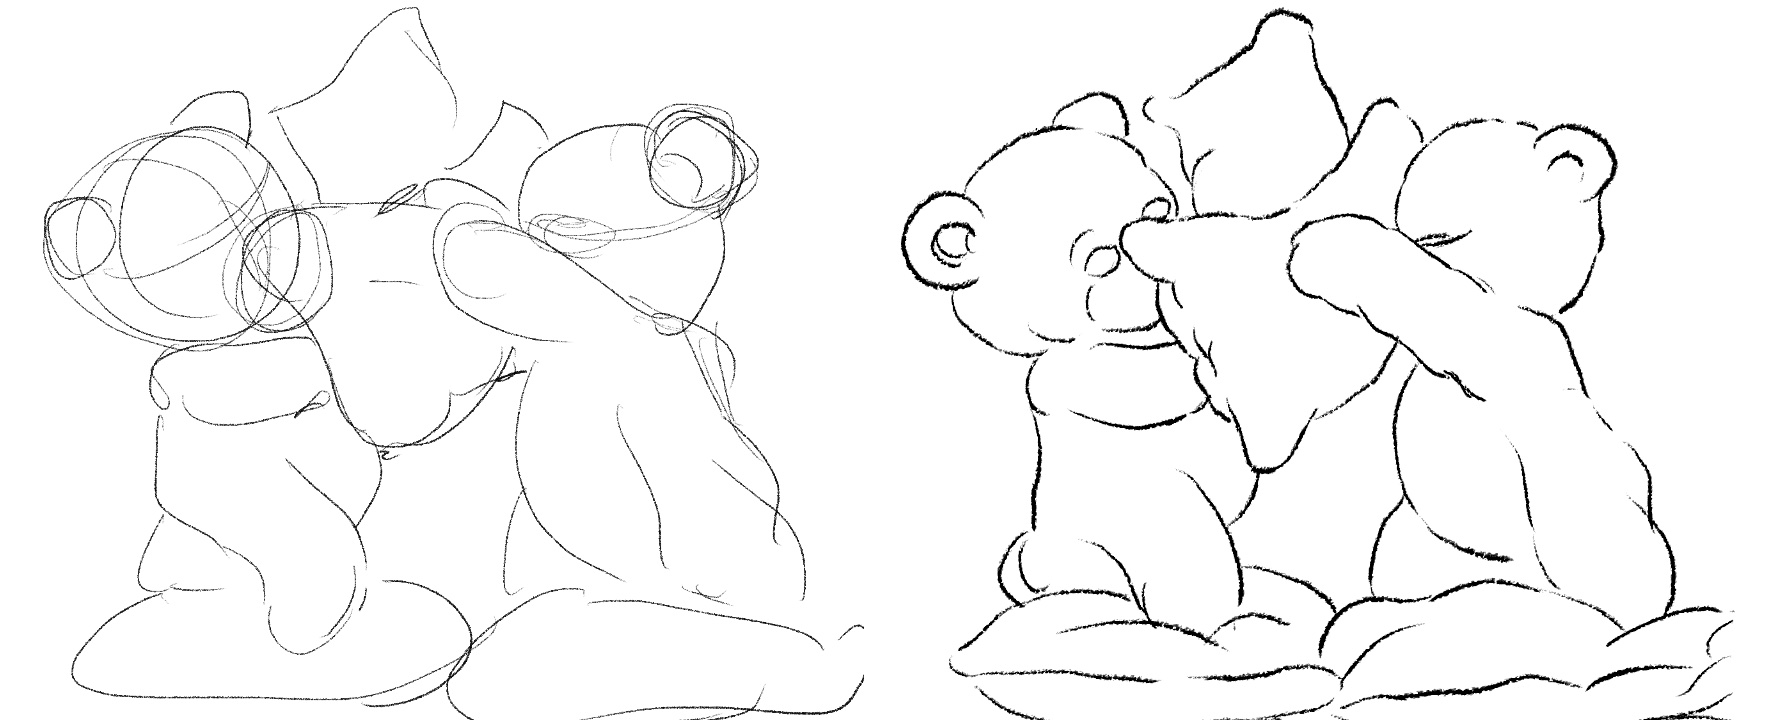 Initial sketches of teddy bear pillow fight